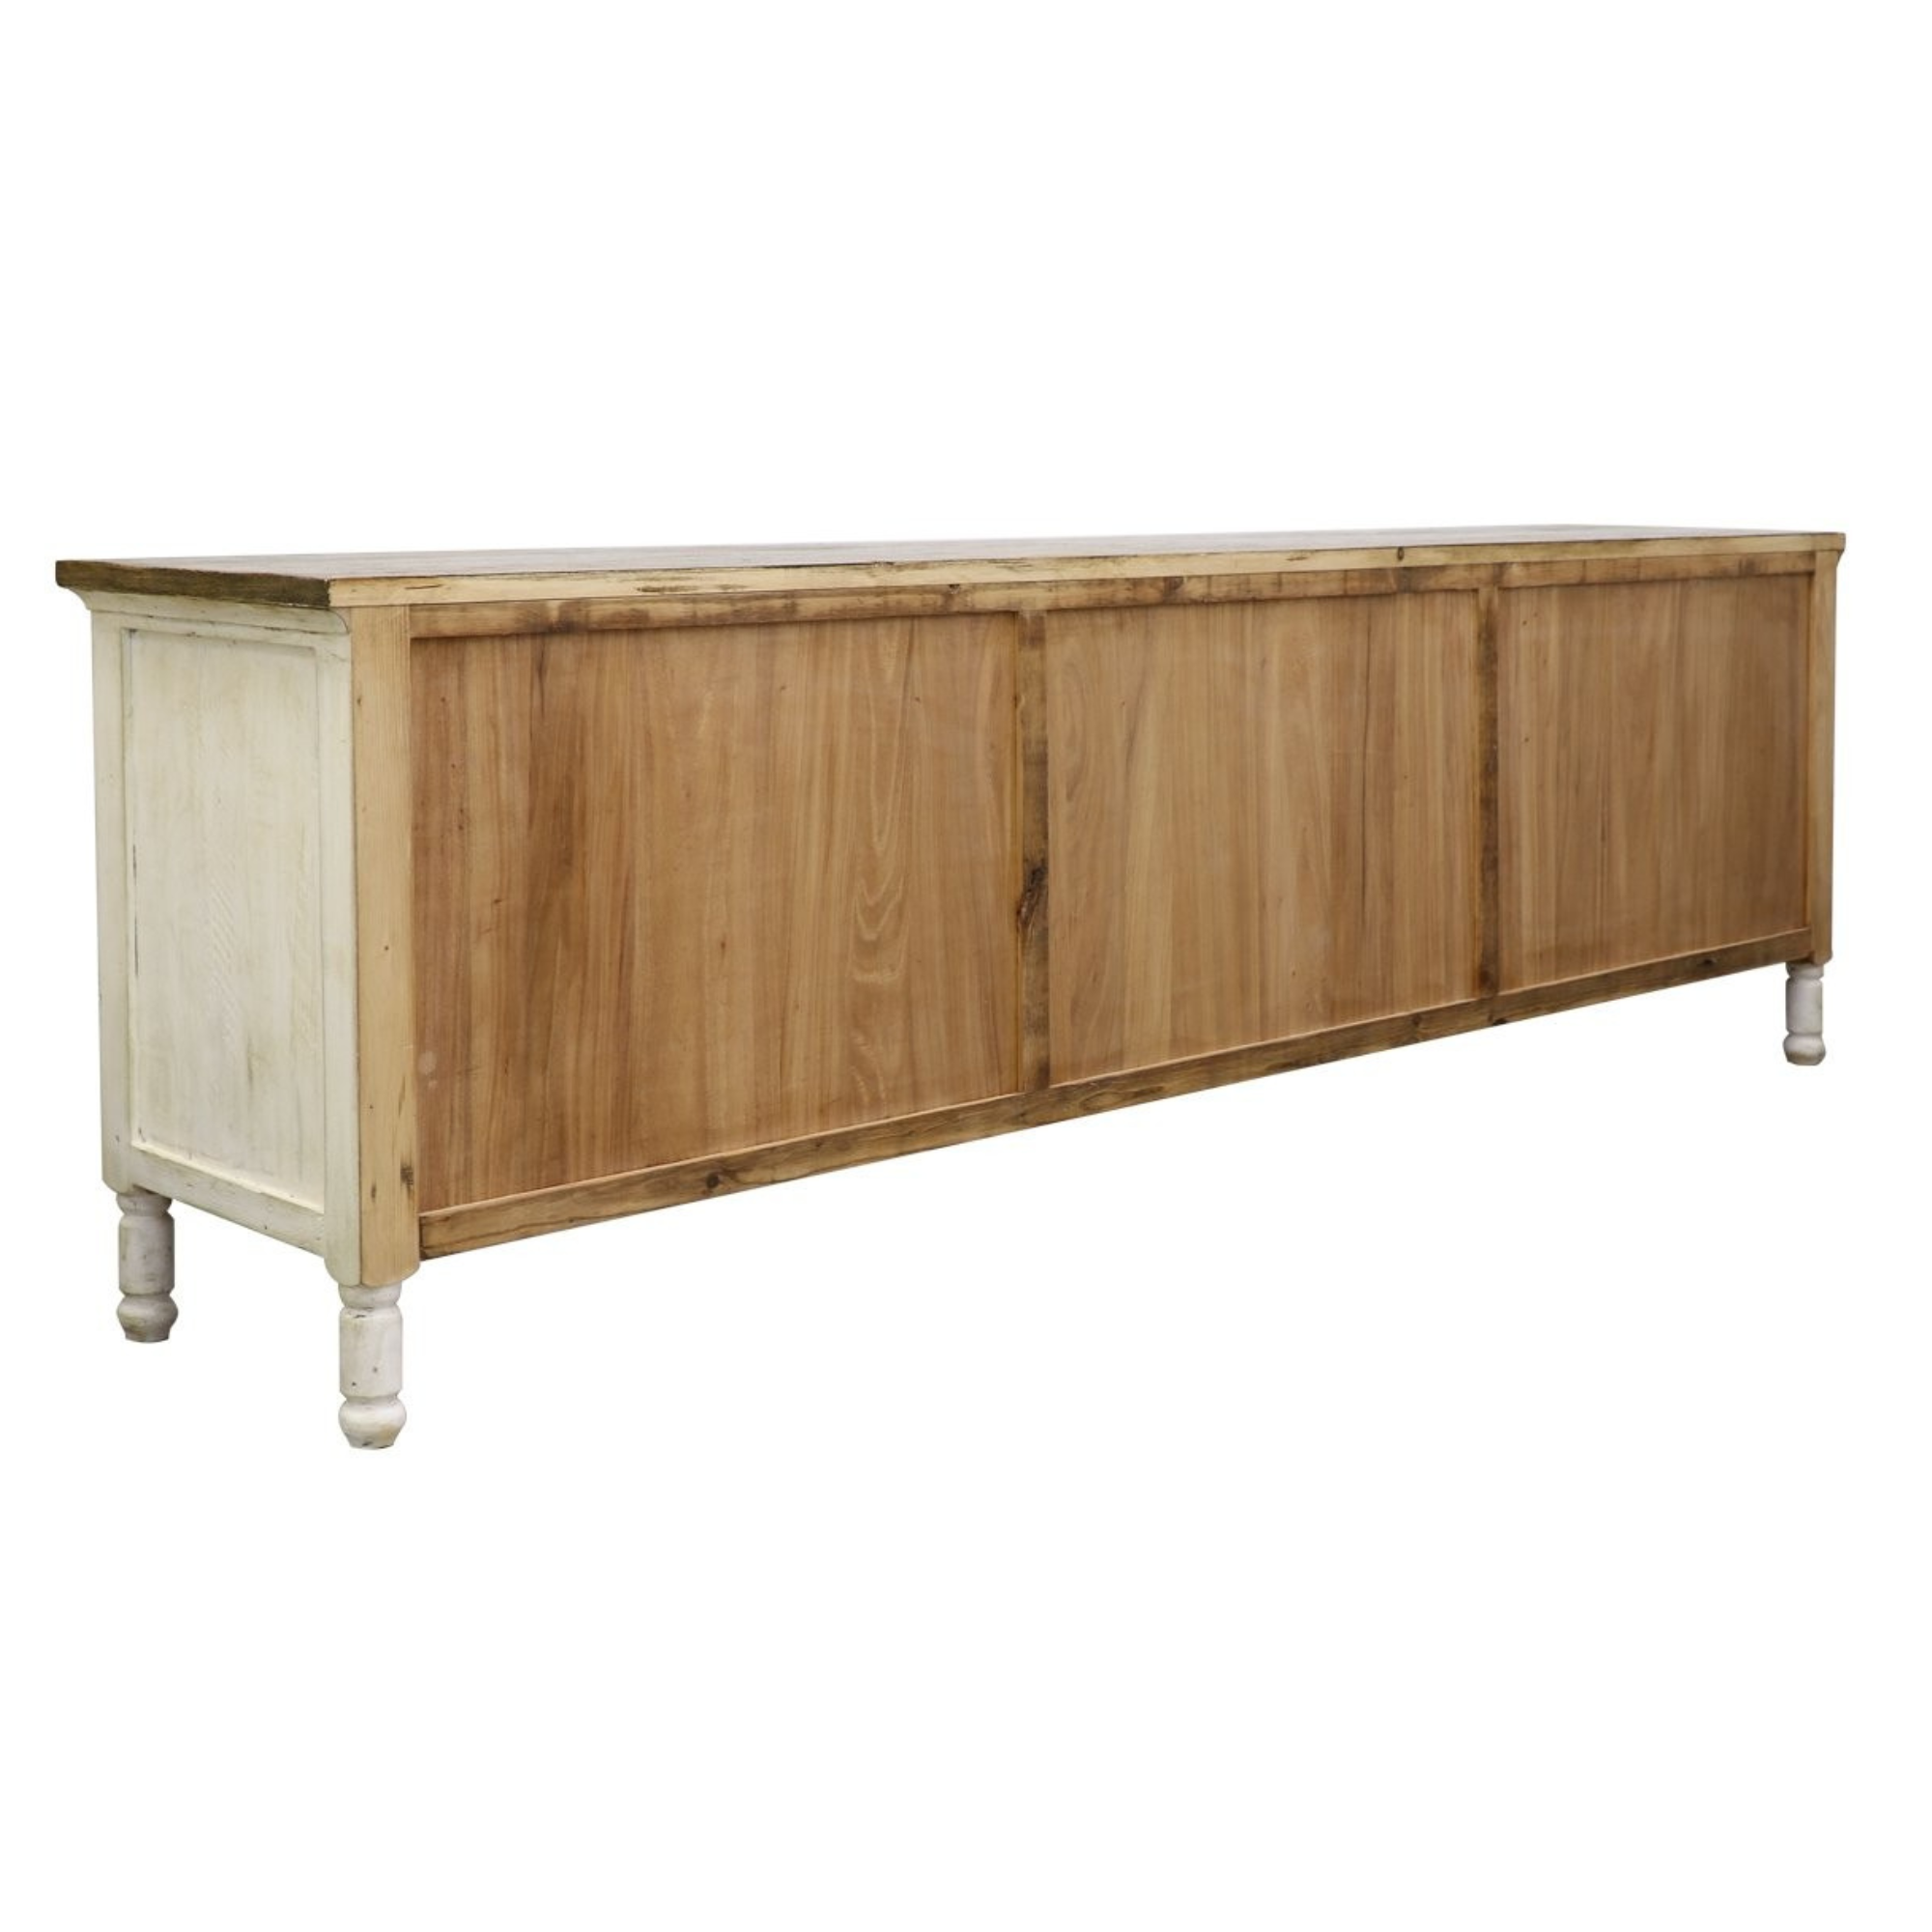 LIMITED EDITION LONG BUFFET 4 DOOR | 4 DRAWER